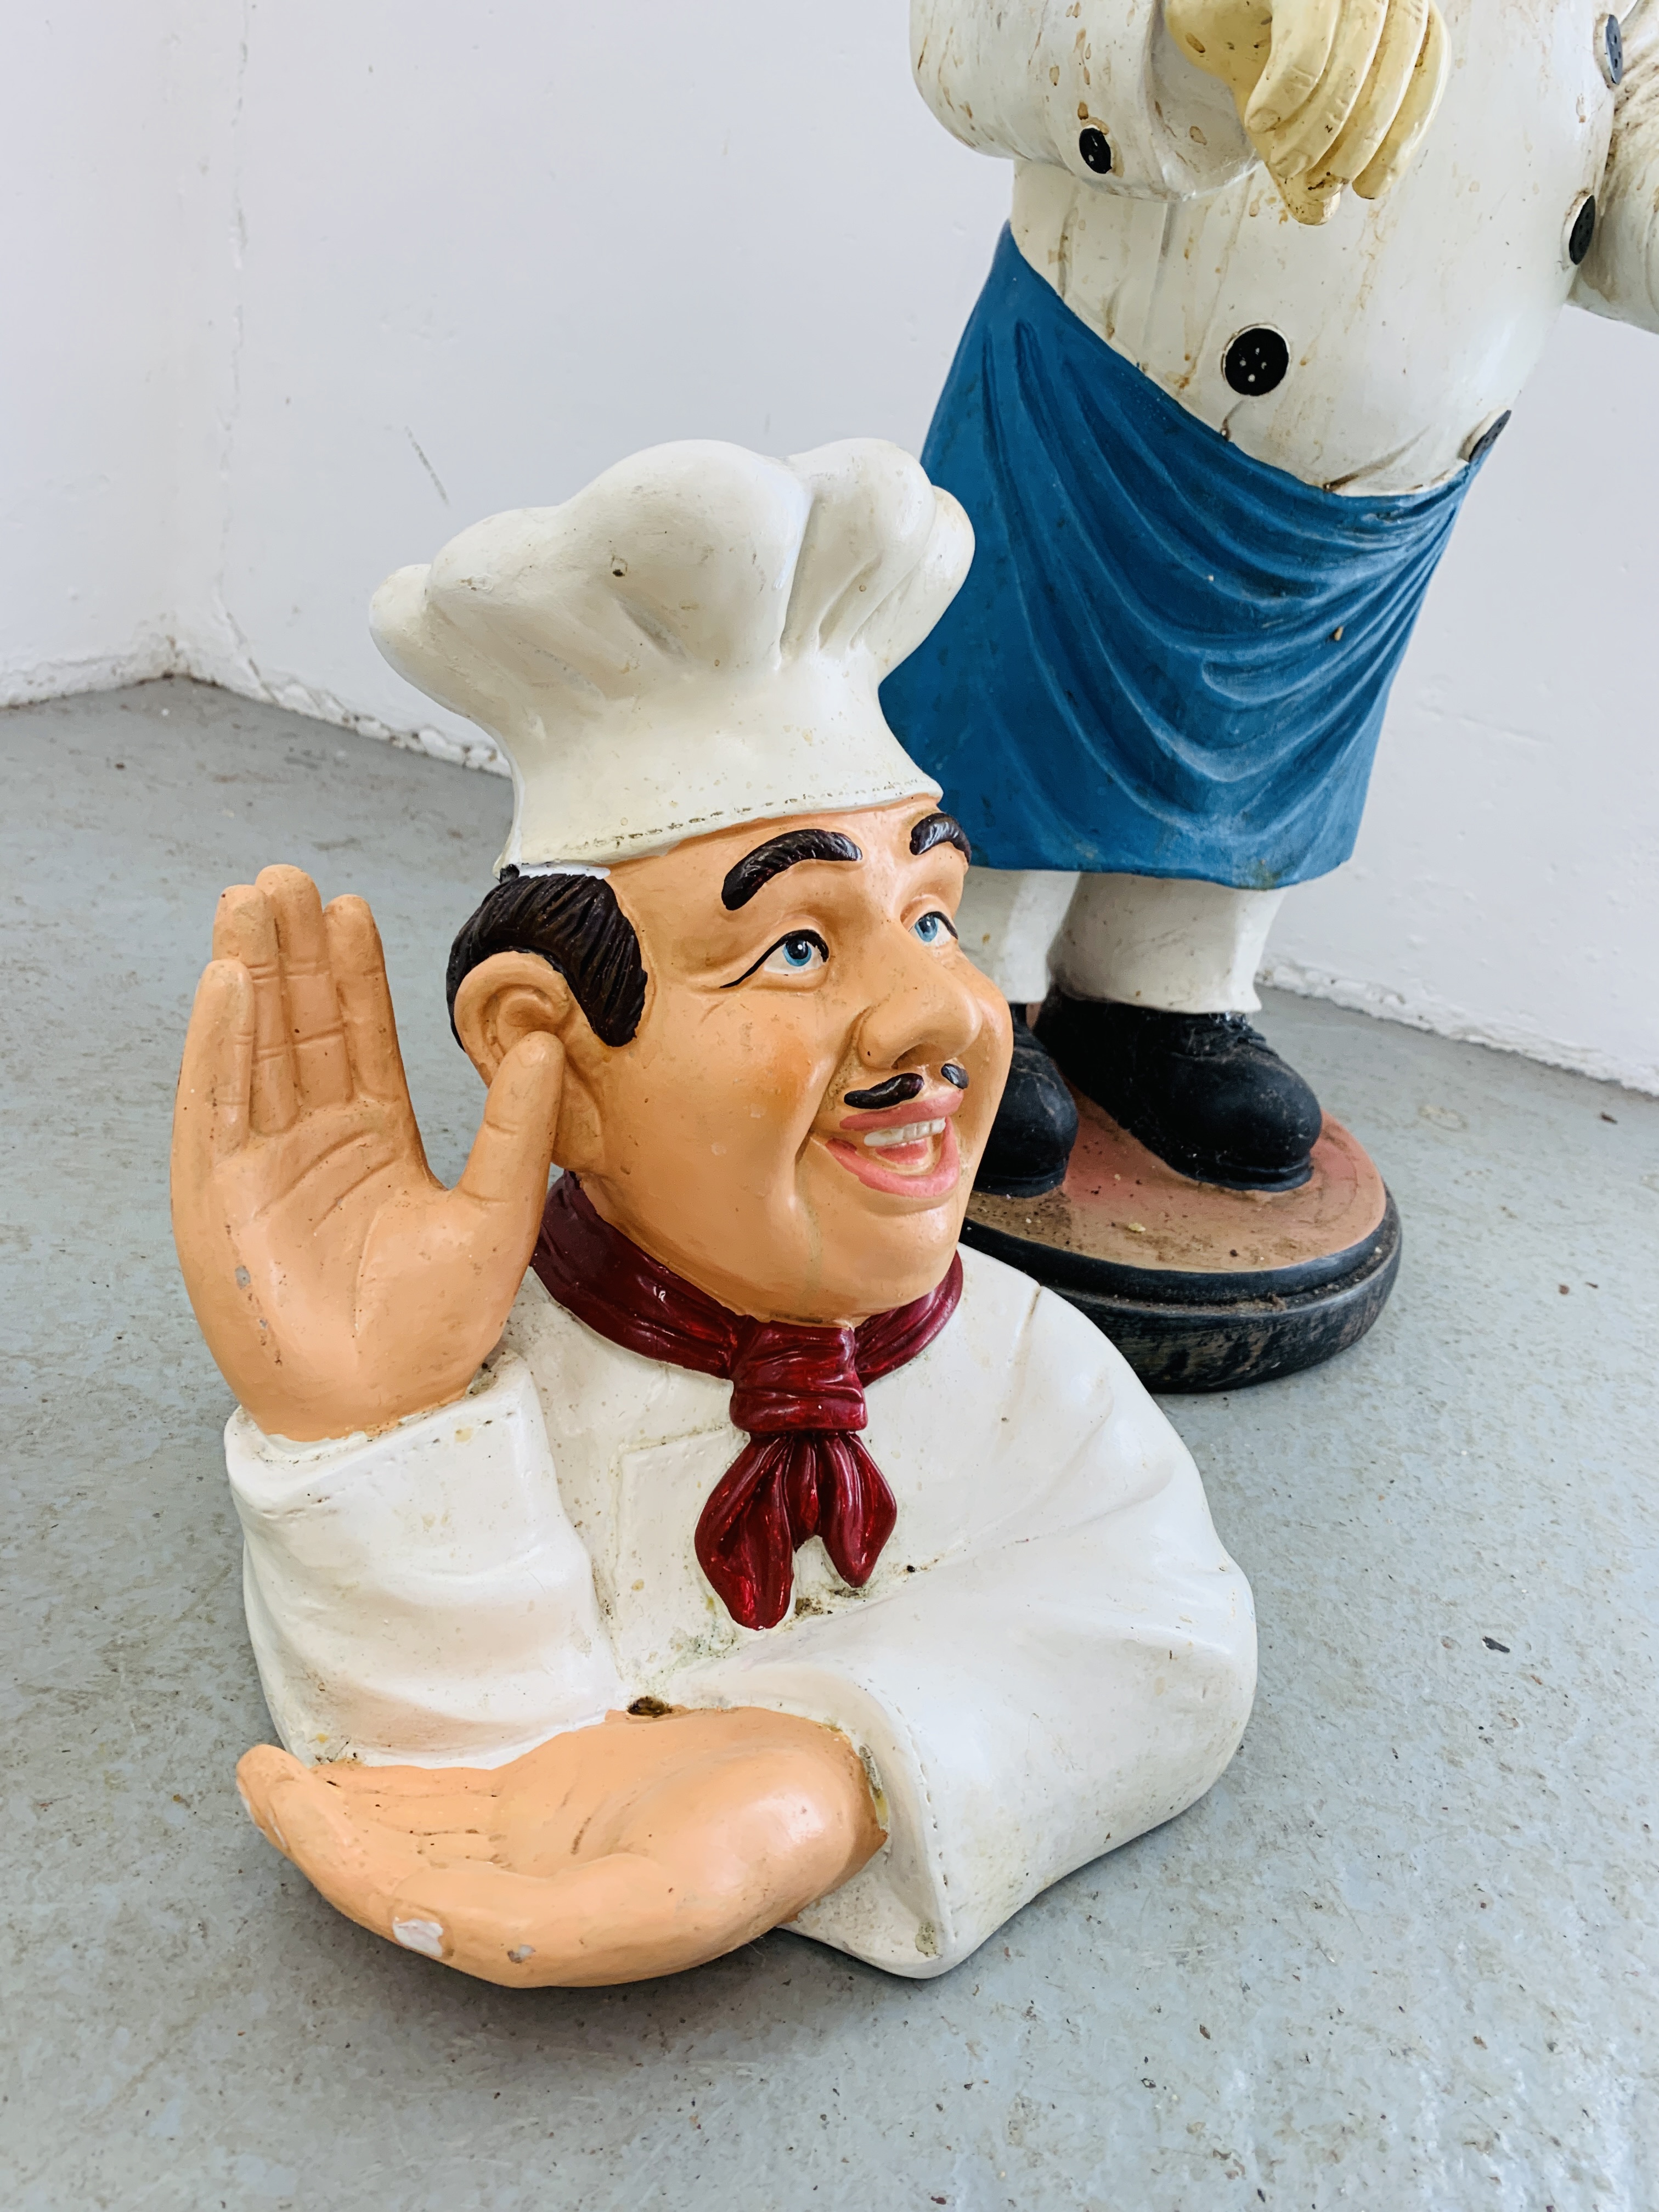 A NOVELTY STANDING "CHEF" FIGURE A/F AND ONE OTHER "CHEF" FIGURE - Image 12 of 12